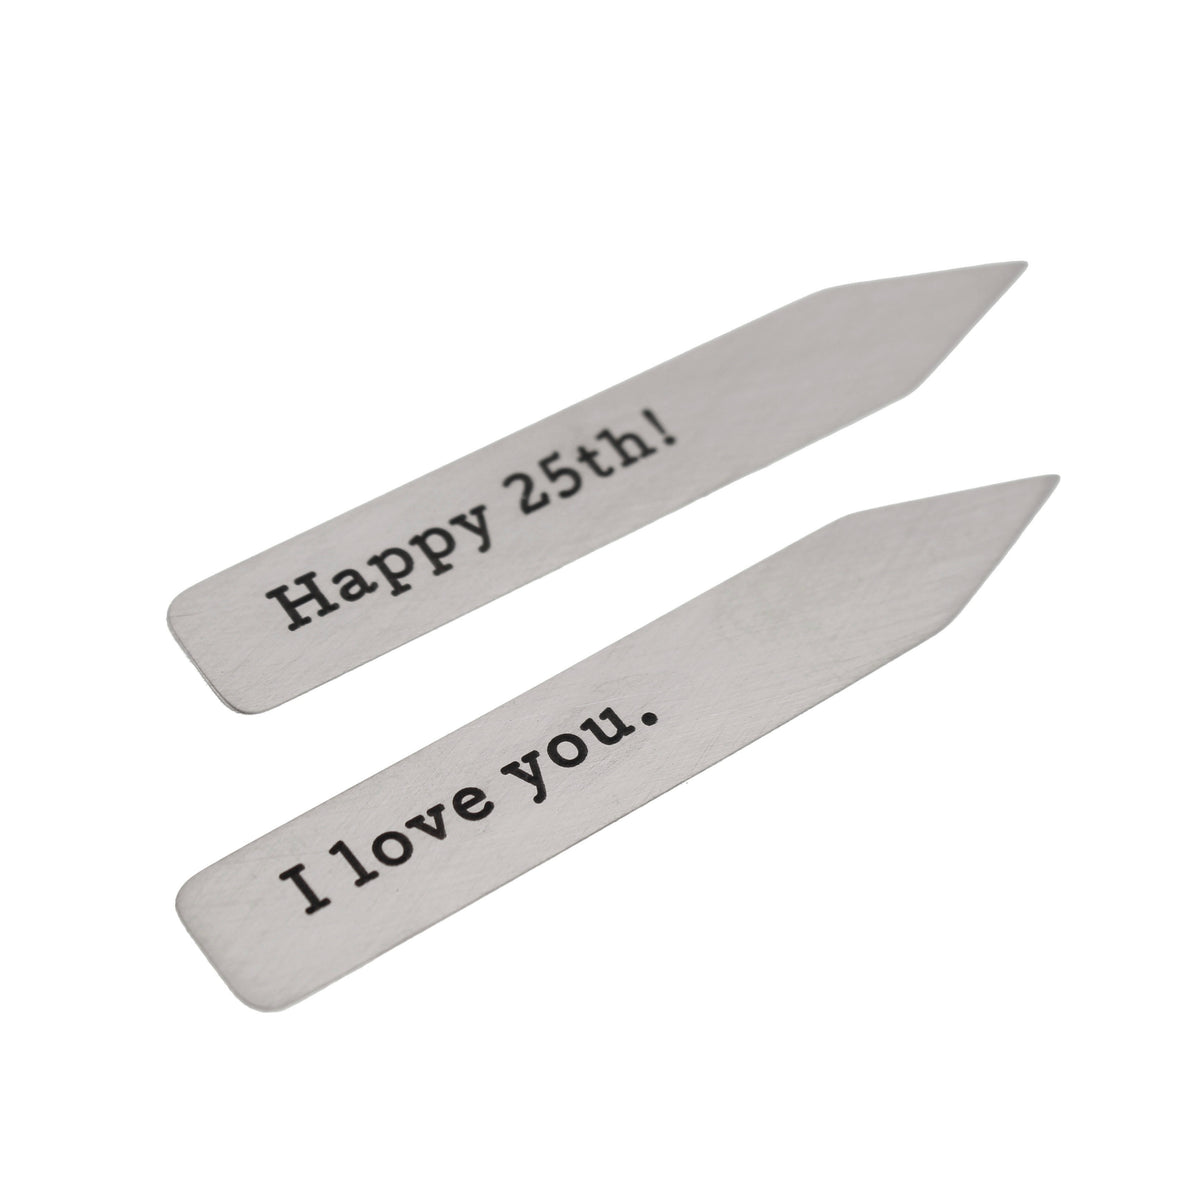 Personalized Sterling Silver Collar Stays - Love It Personalized